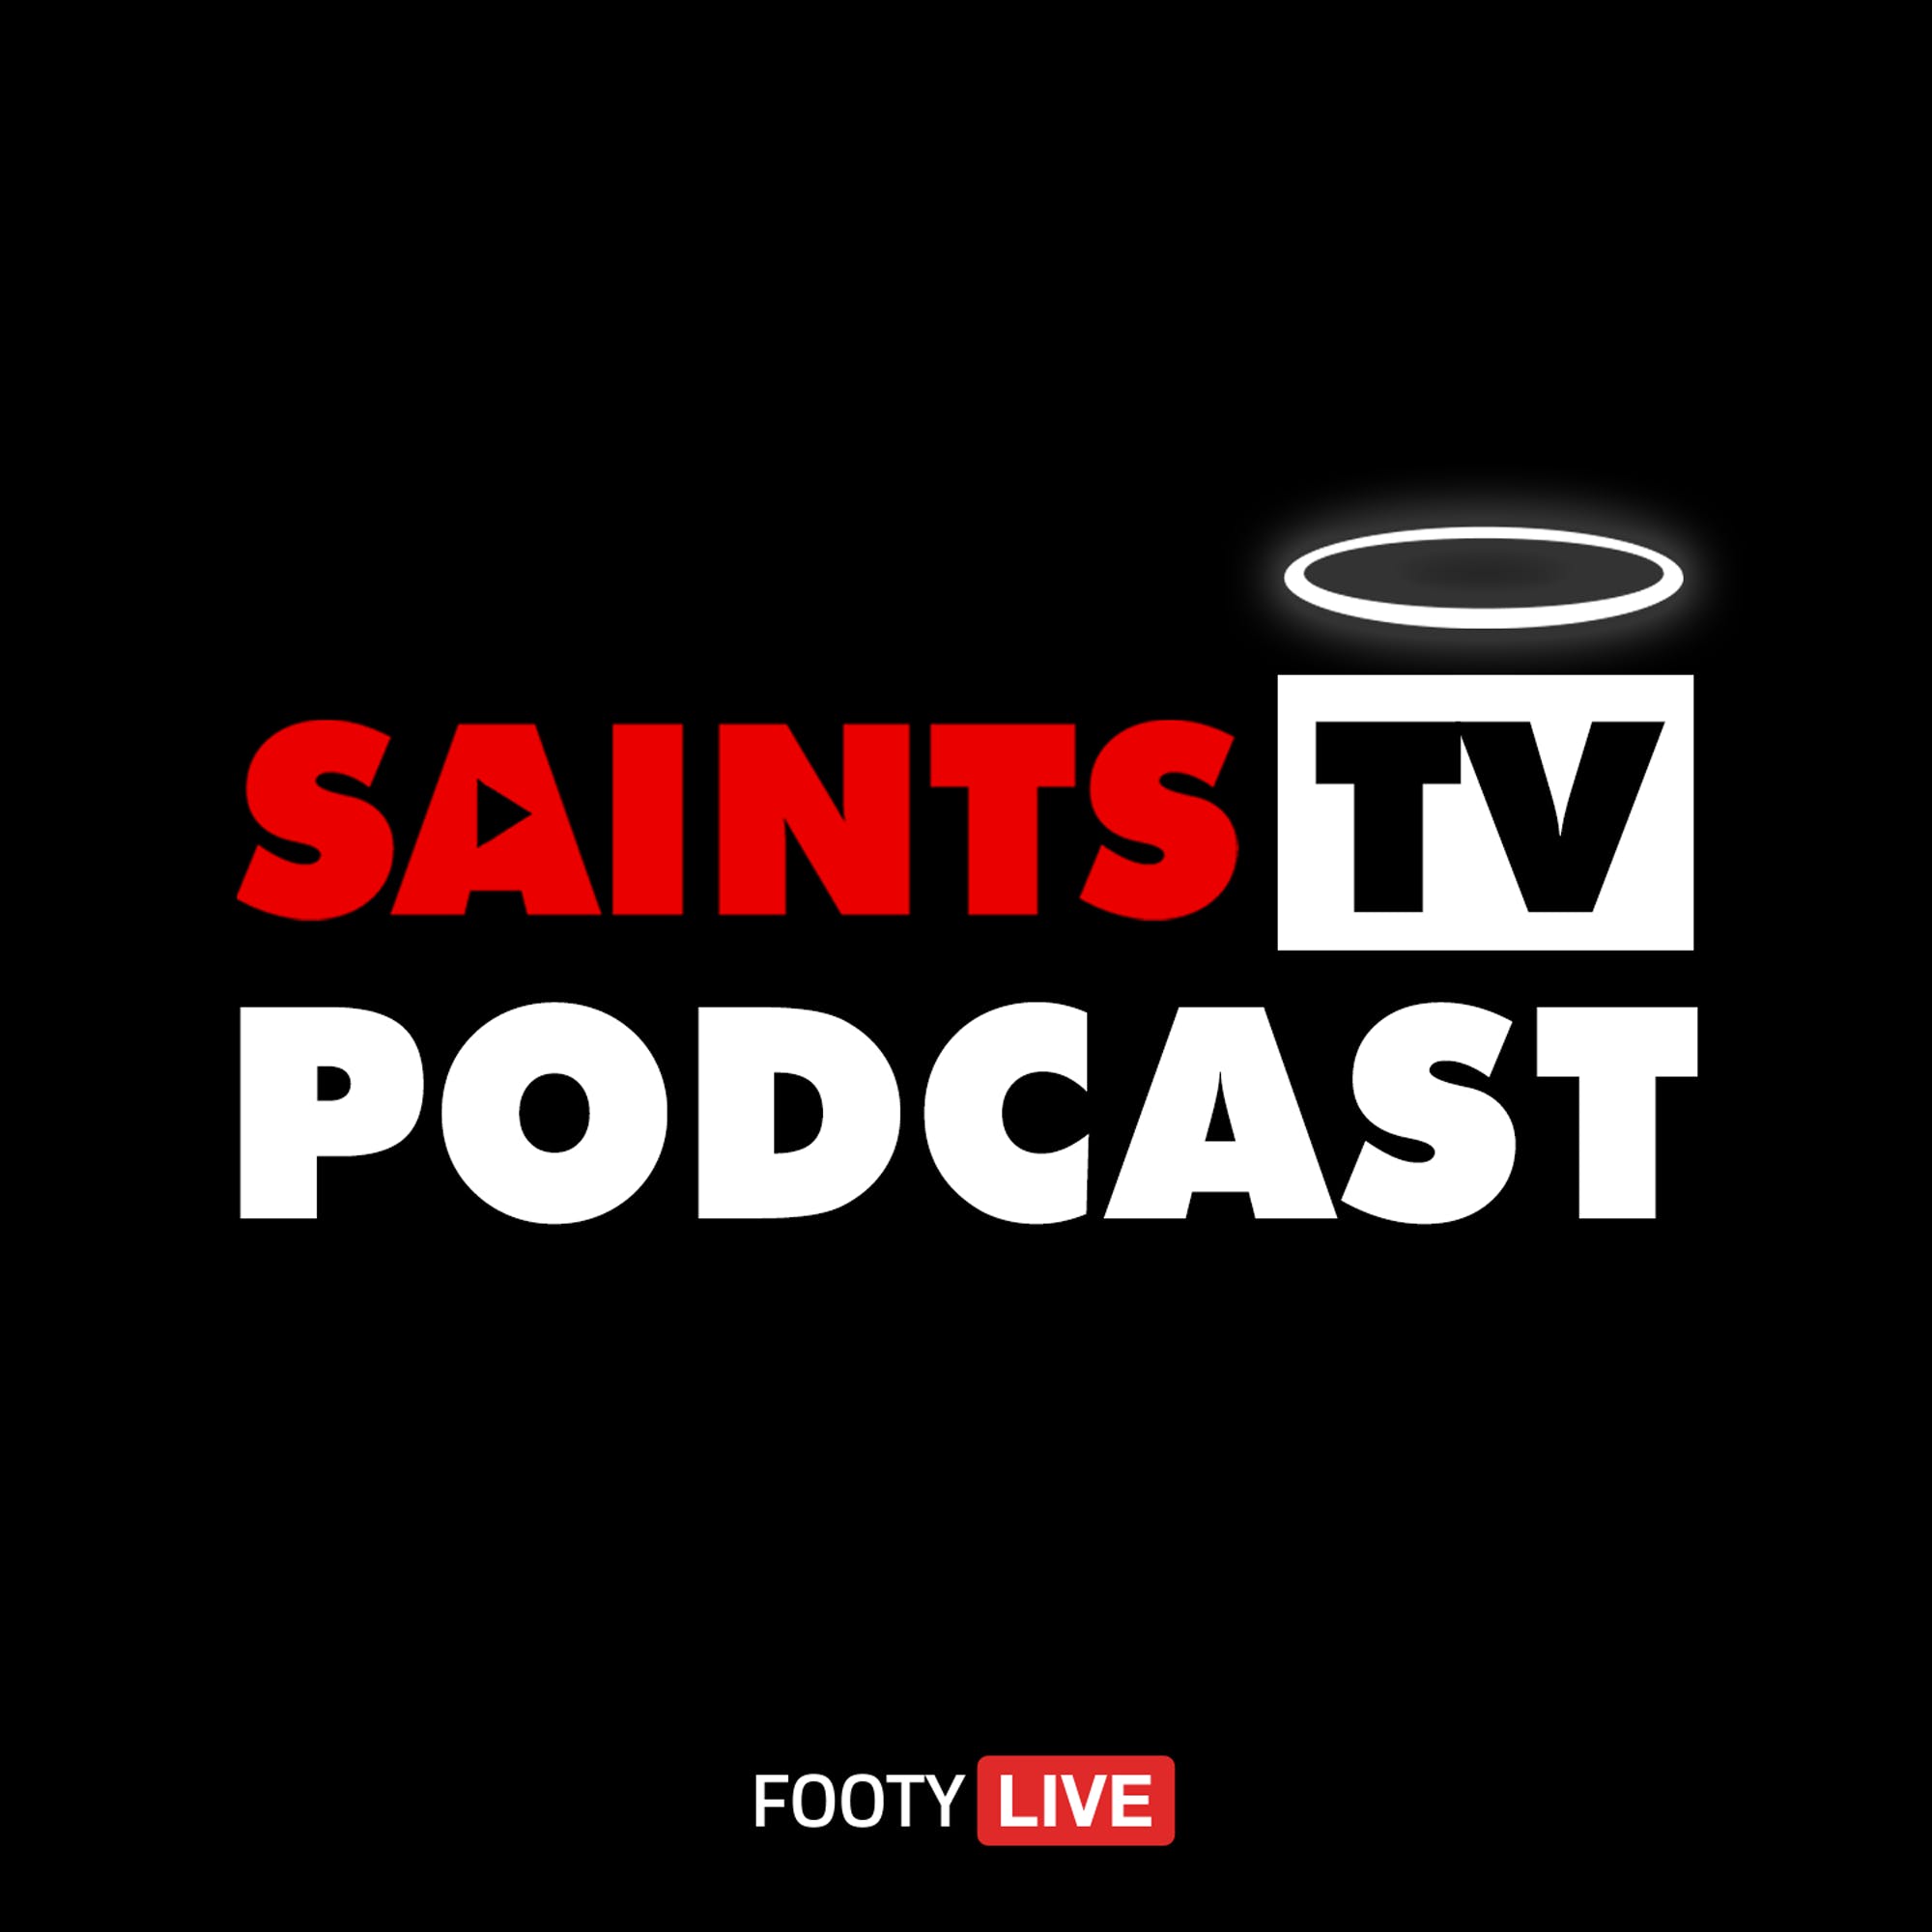 Reflecting on St Kilda's First Six Games